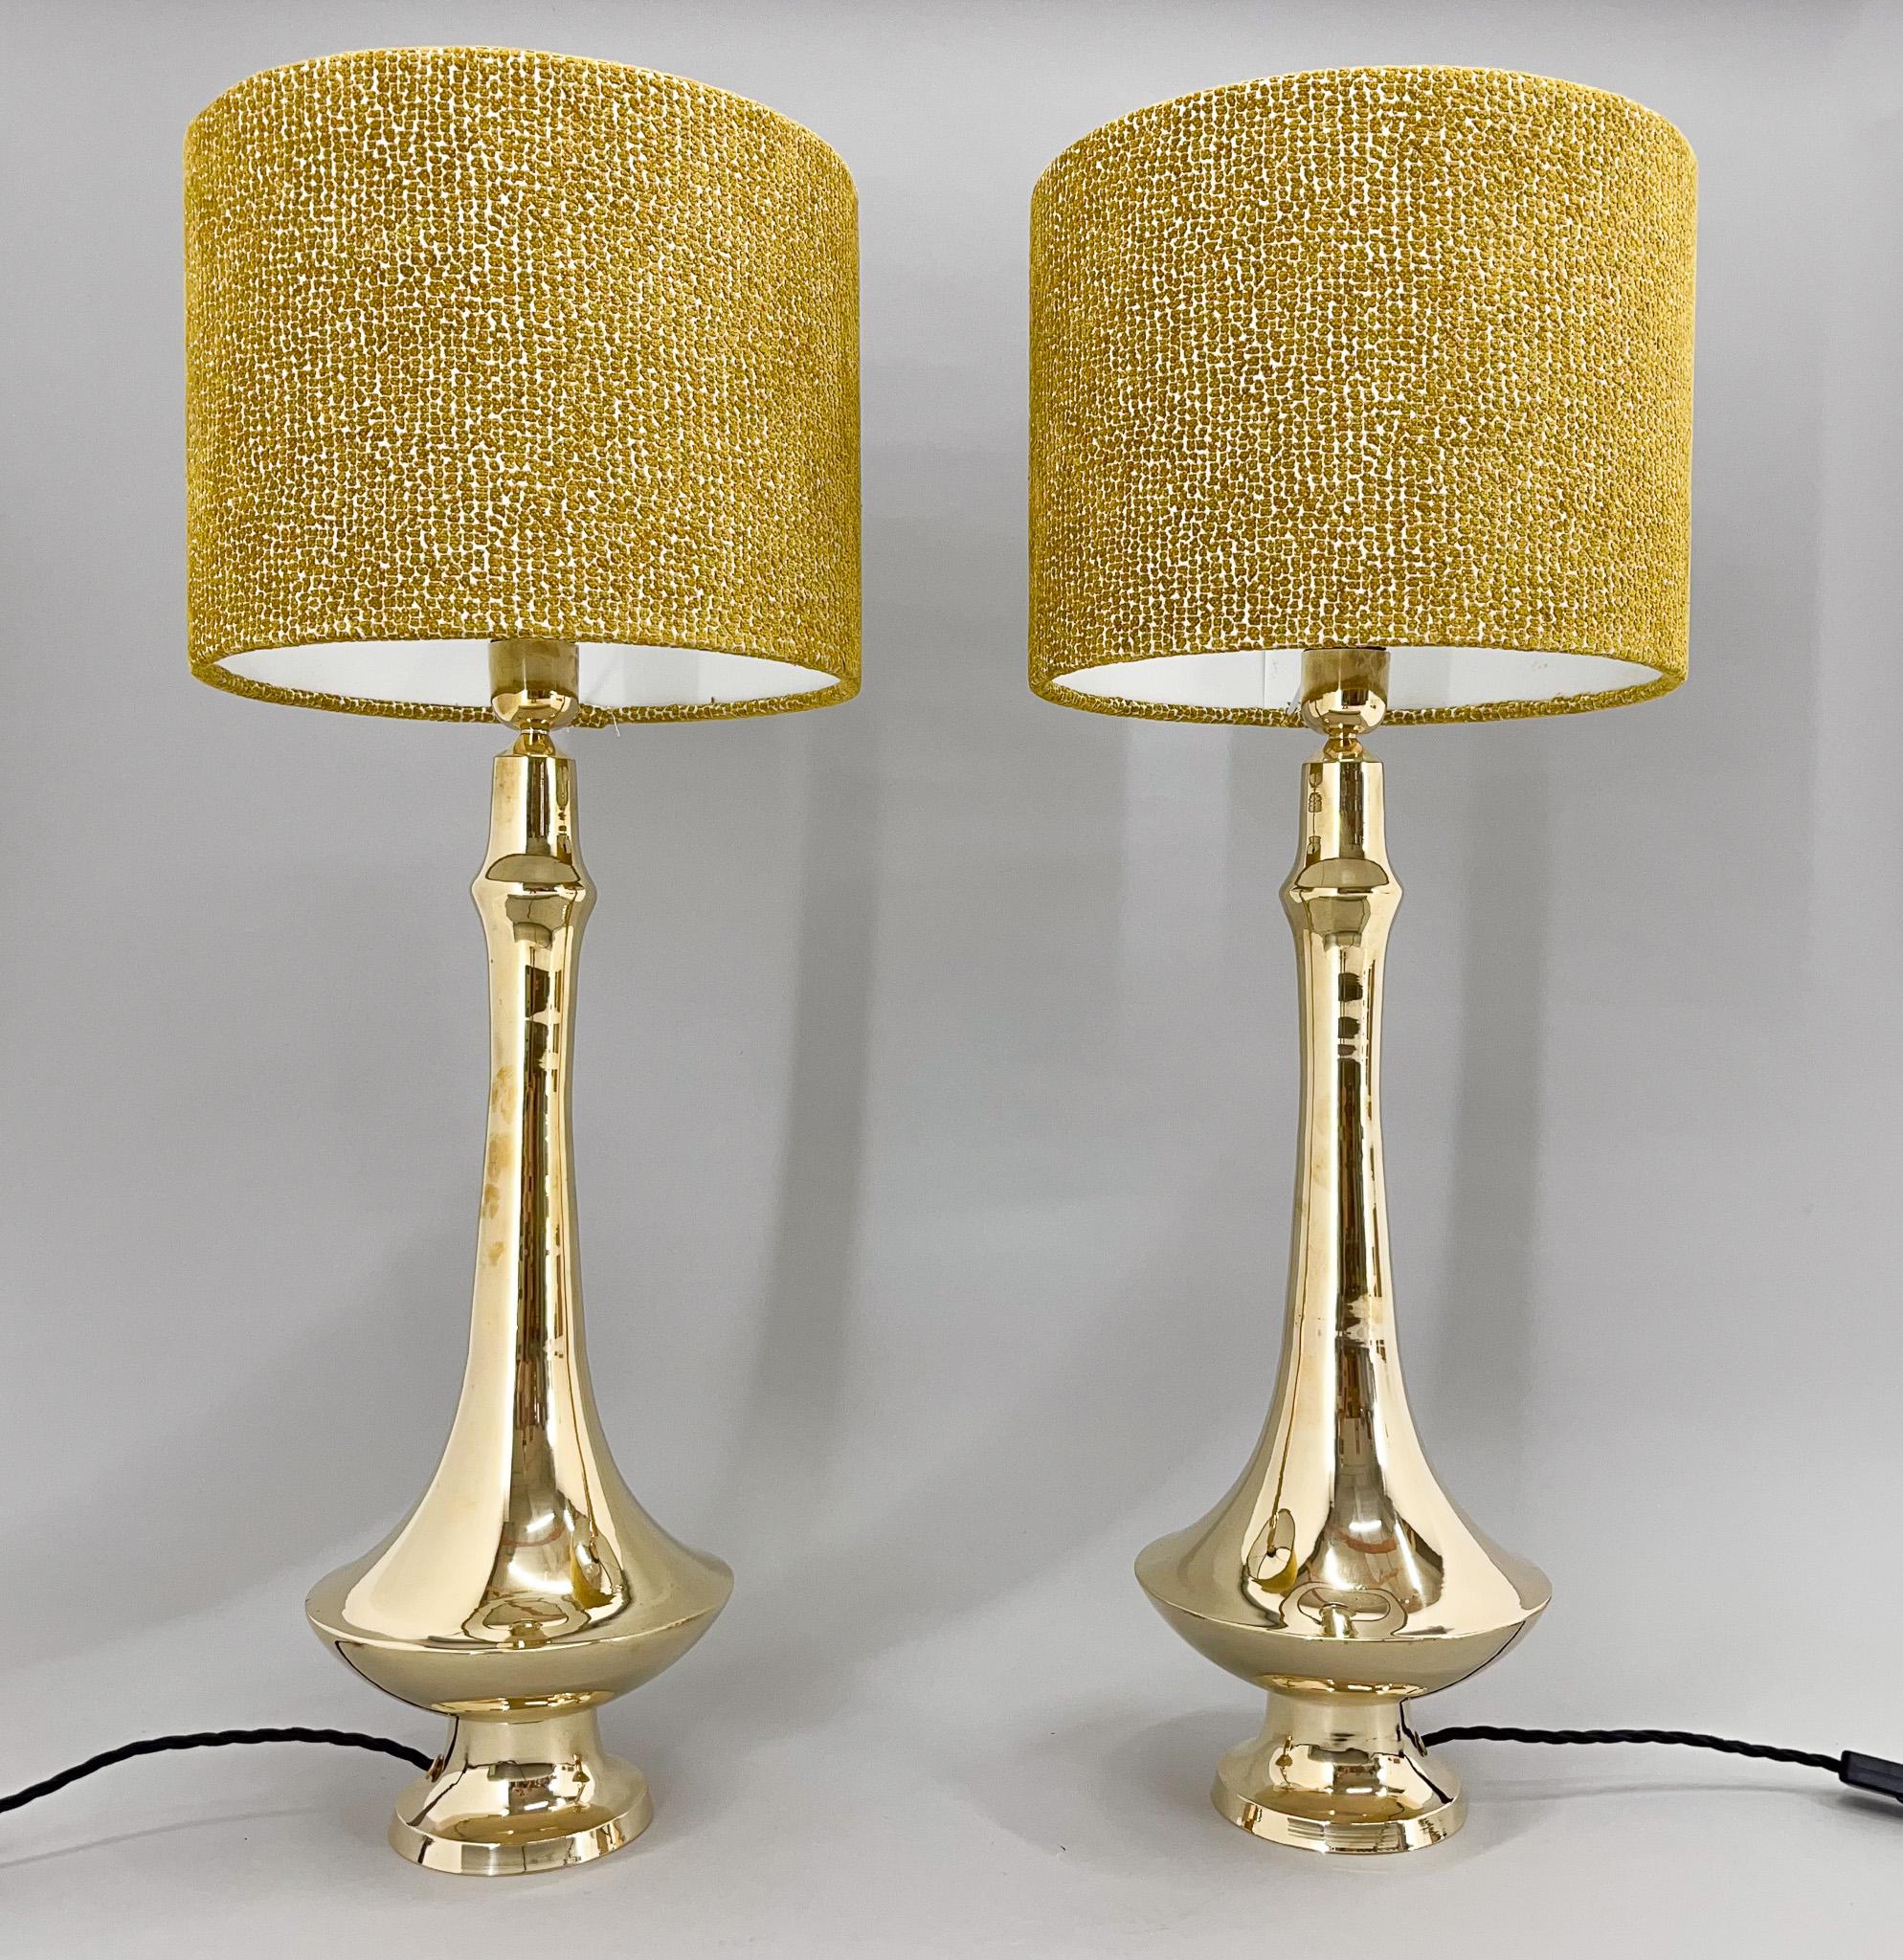 Czech Pair of Tall Brass Table Lamps, 1950s, Restored For Sale